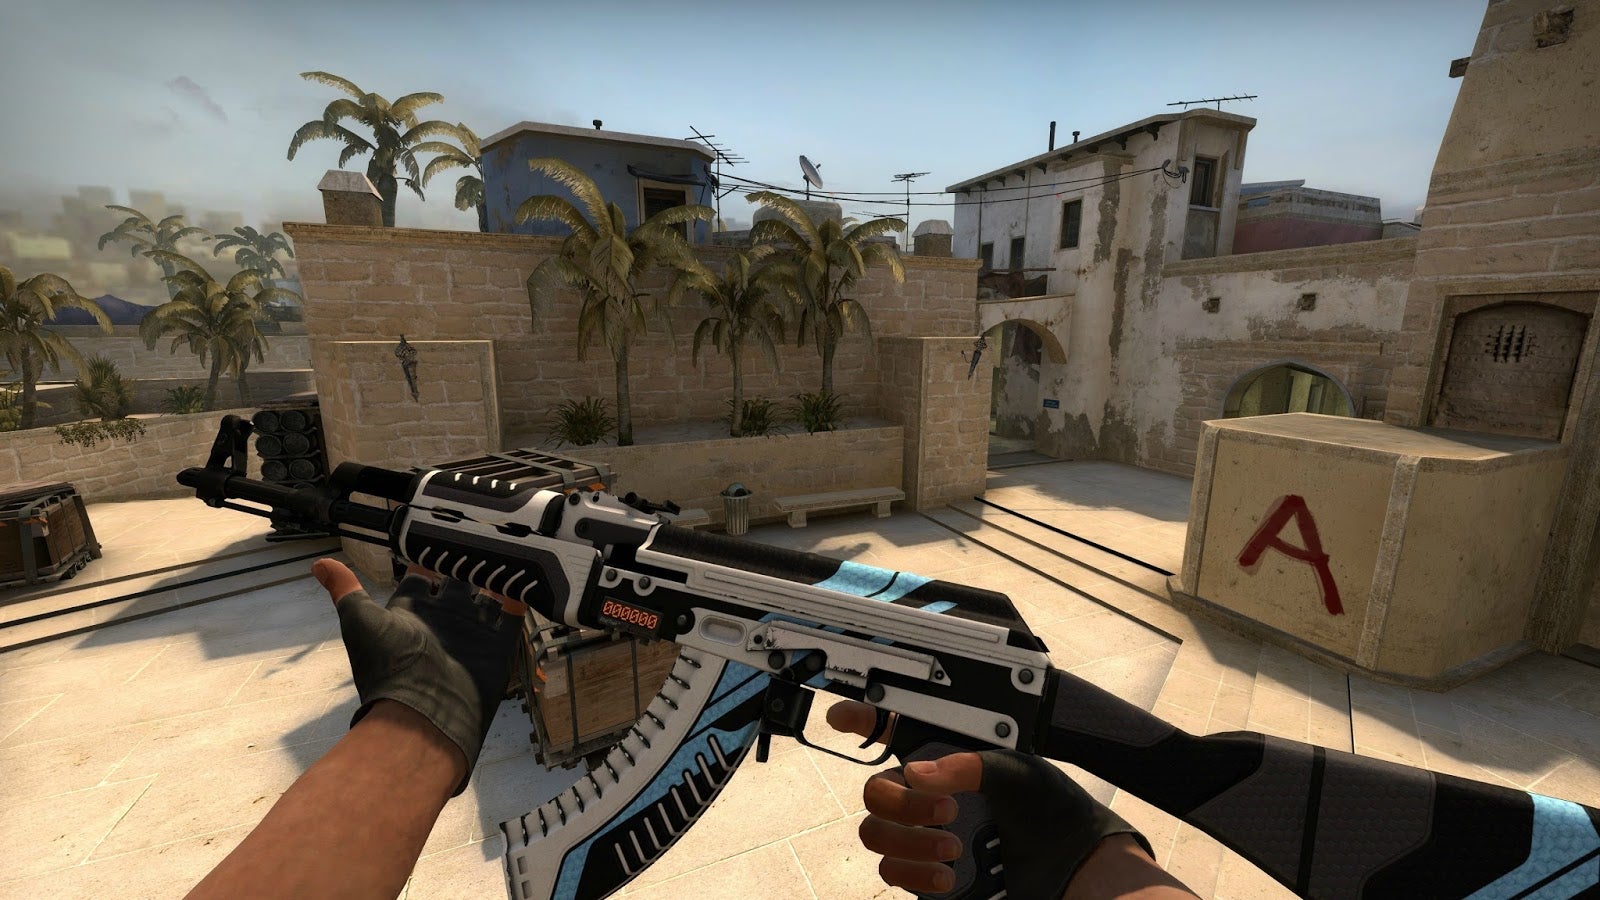 Hackers steal $2m worth of CS:GO skins from collector